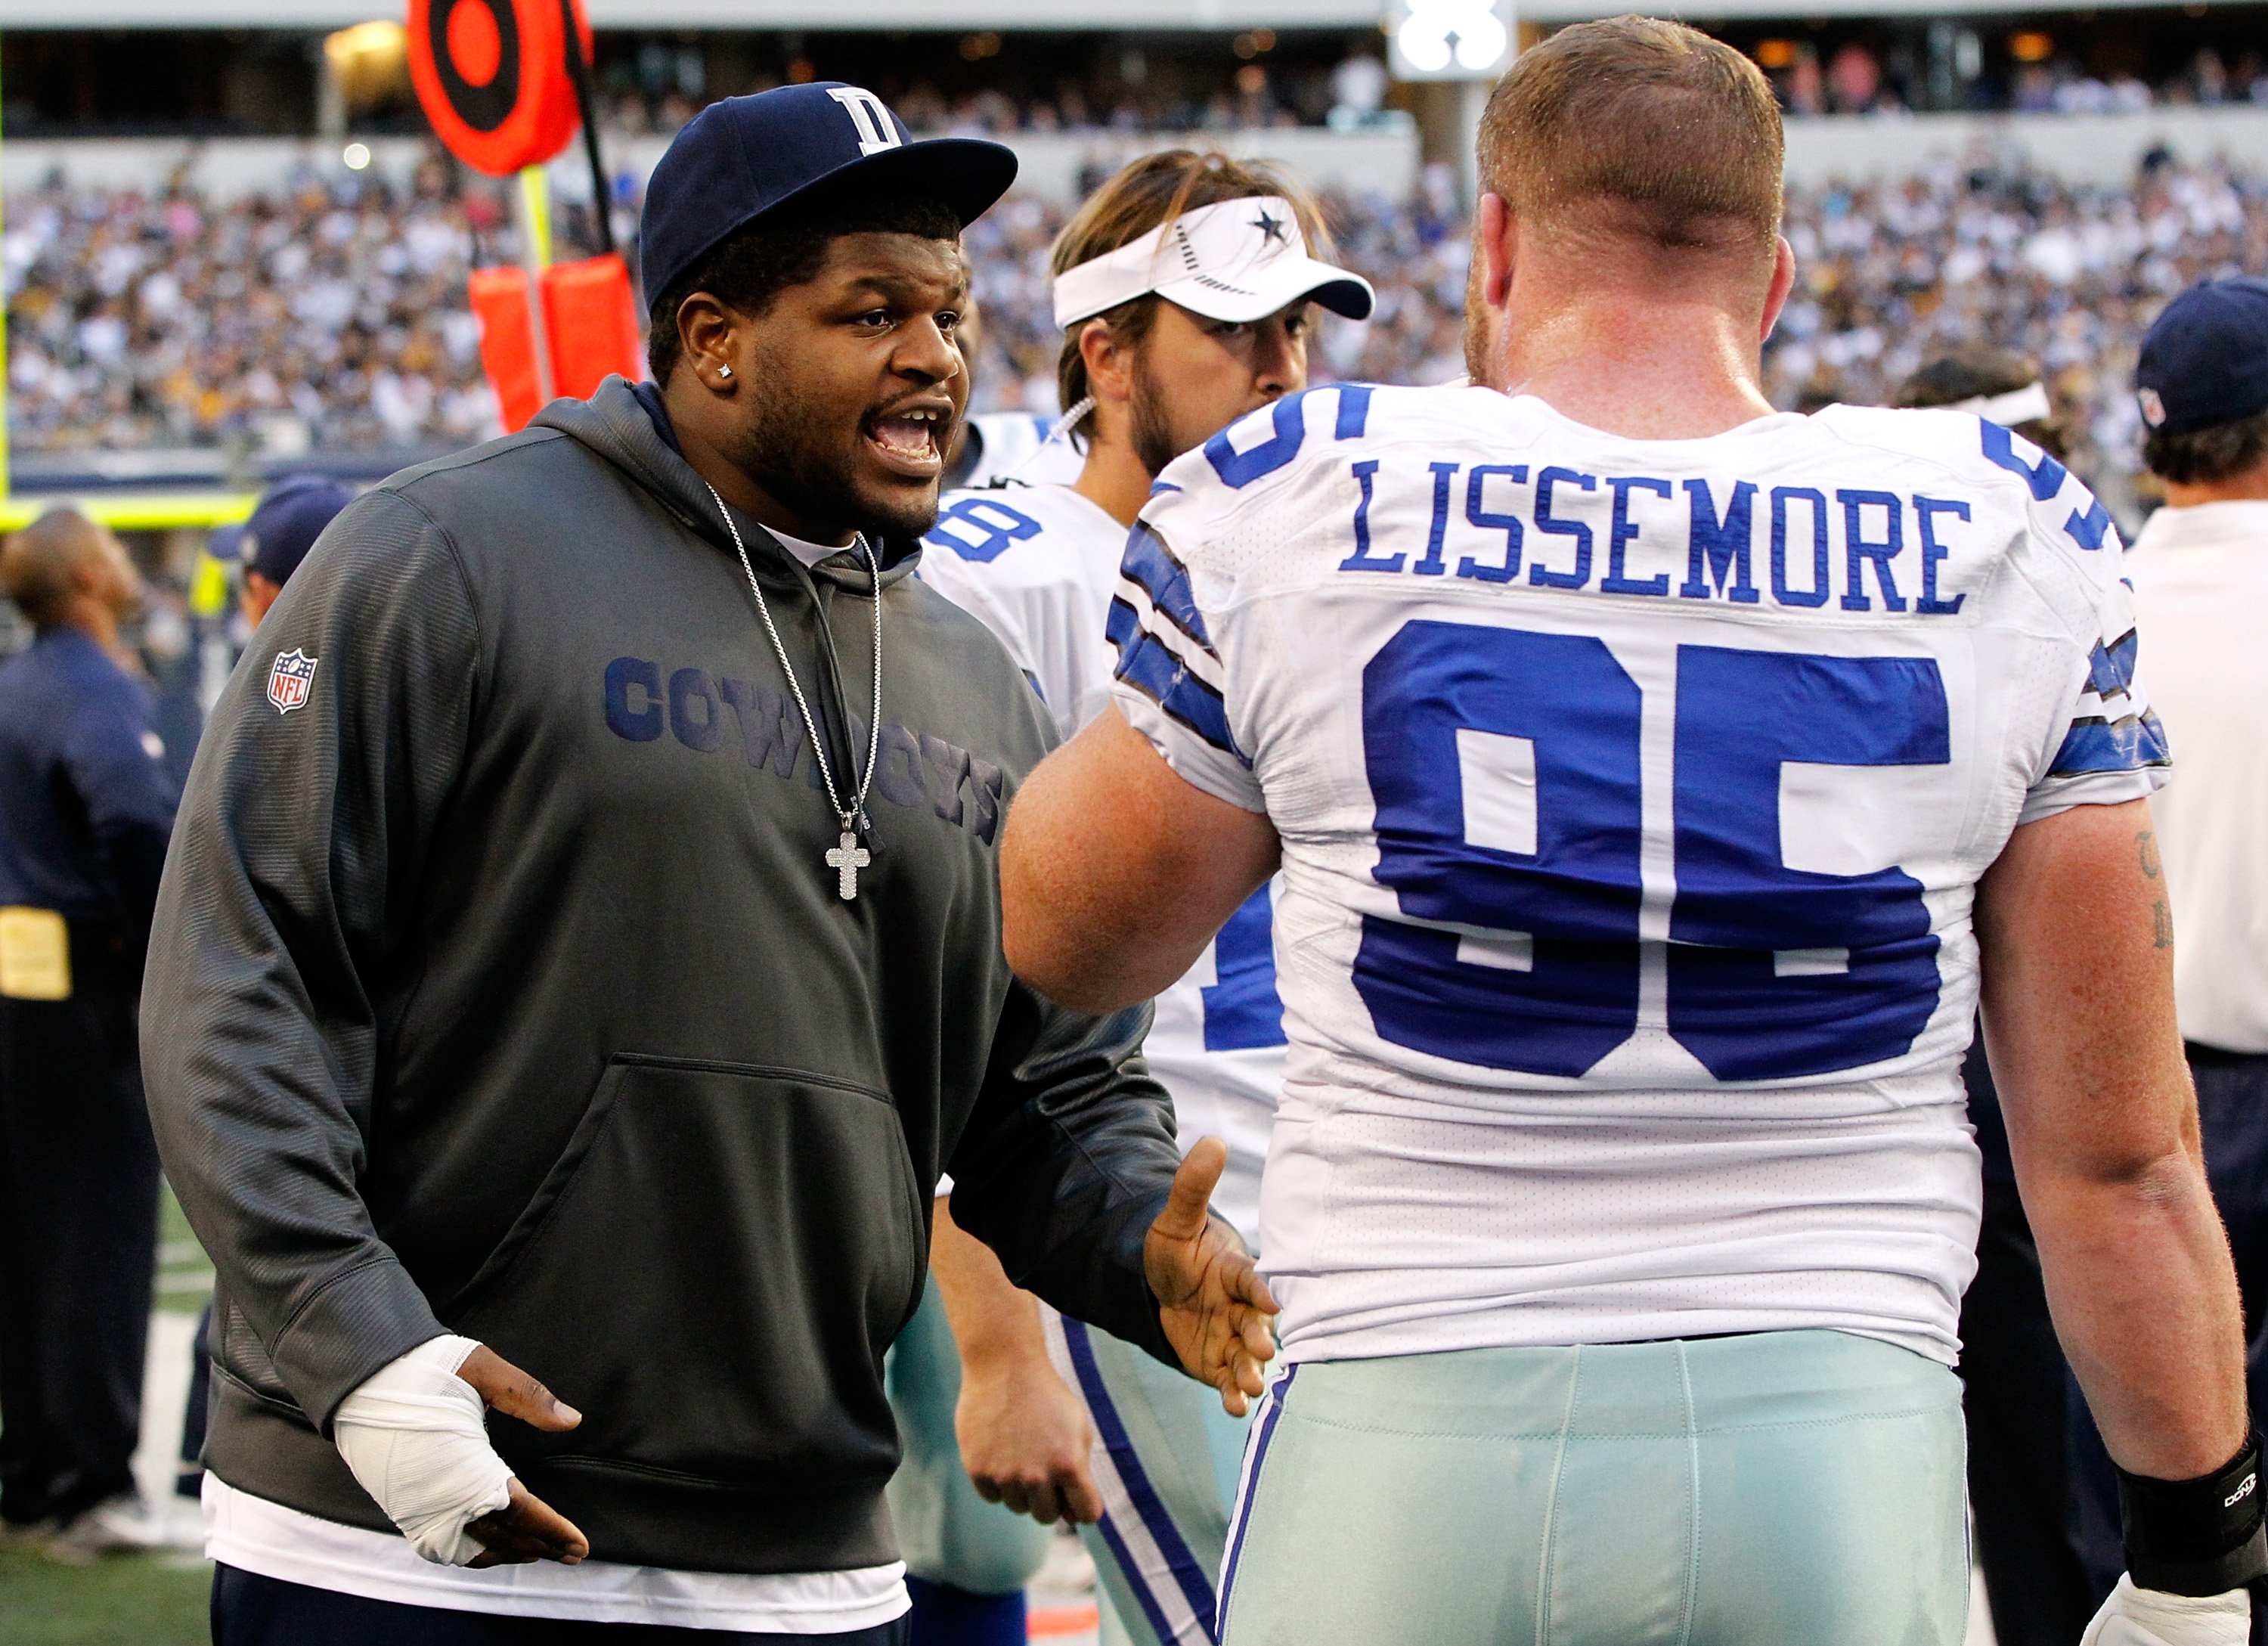 Josh Brent talks with teammate Sean Lissemore #95 at Cowboys Stadium on December 16, 2012 | Photo: Getty Images